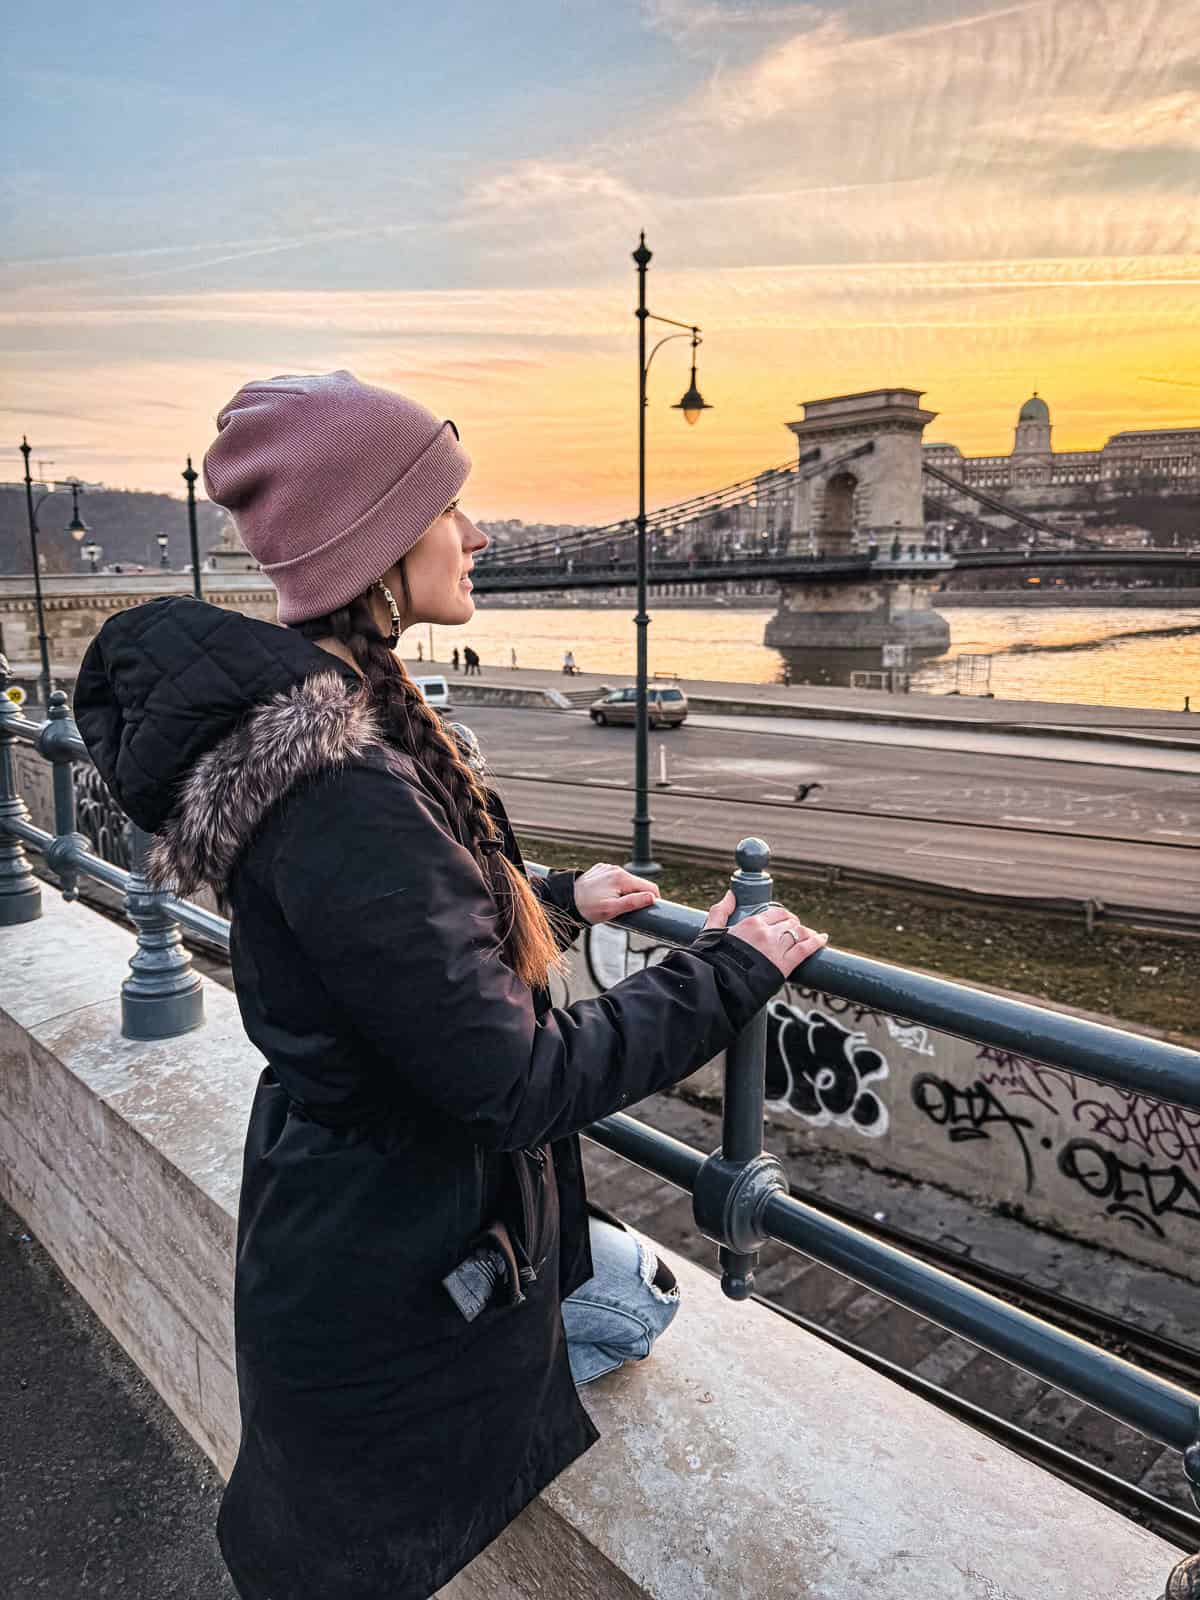 A woman in a pink beanie and black coat gazes at the Chain Bridge and historical buildings in Budapest during a beautiful sunset.